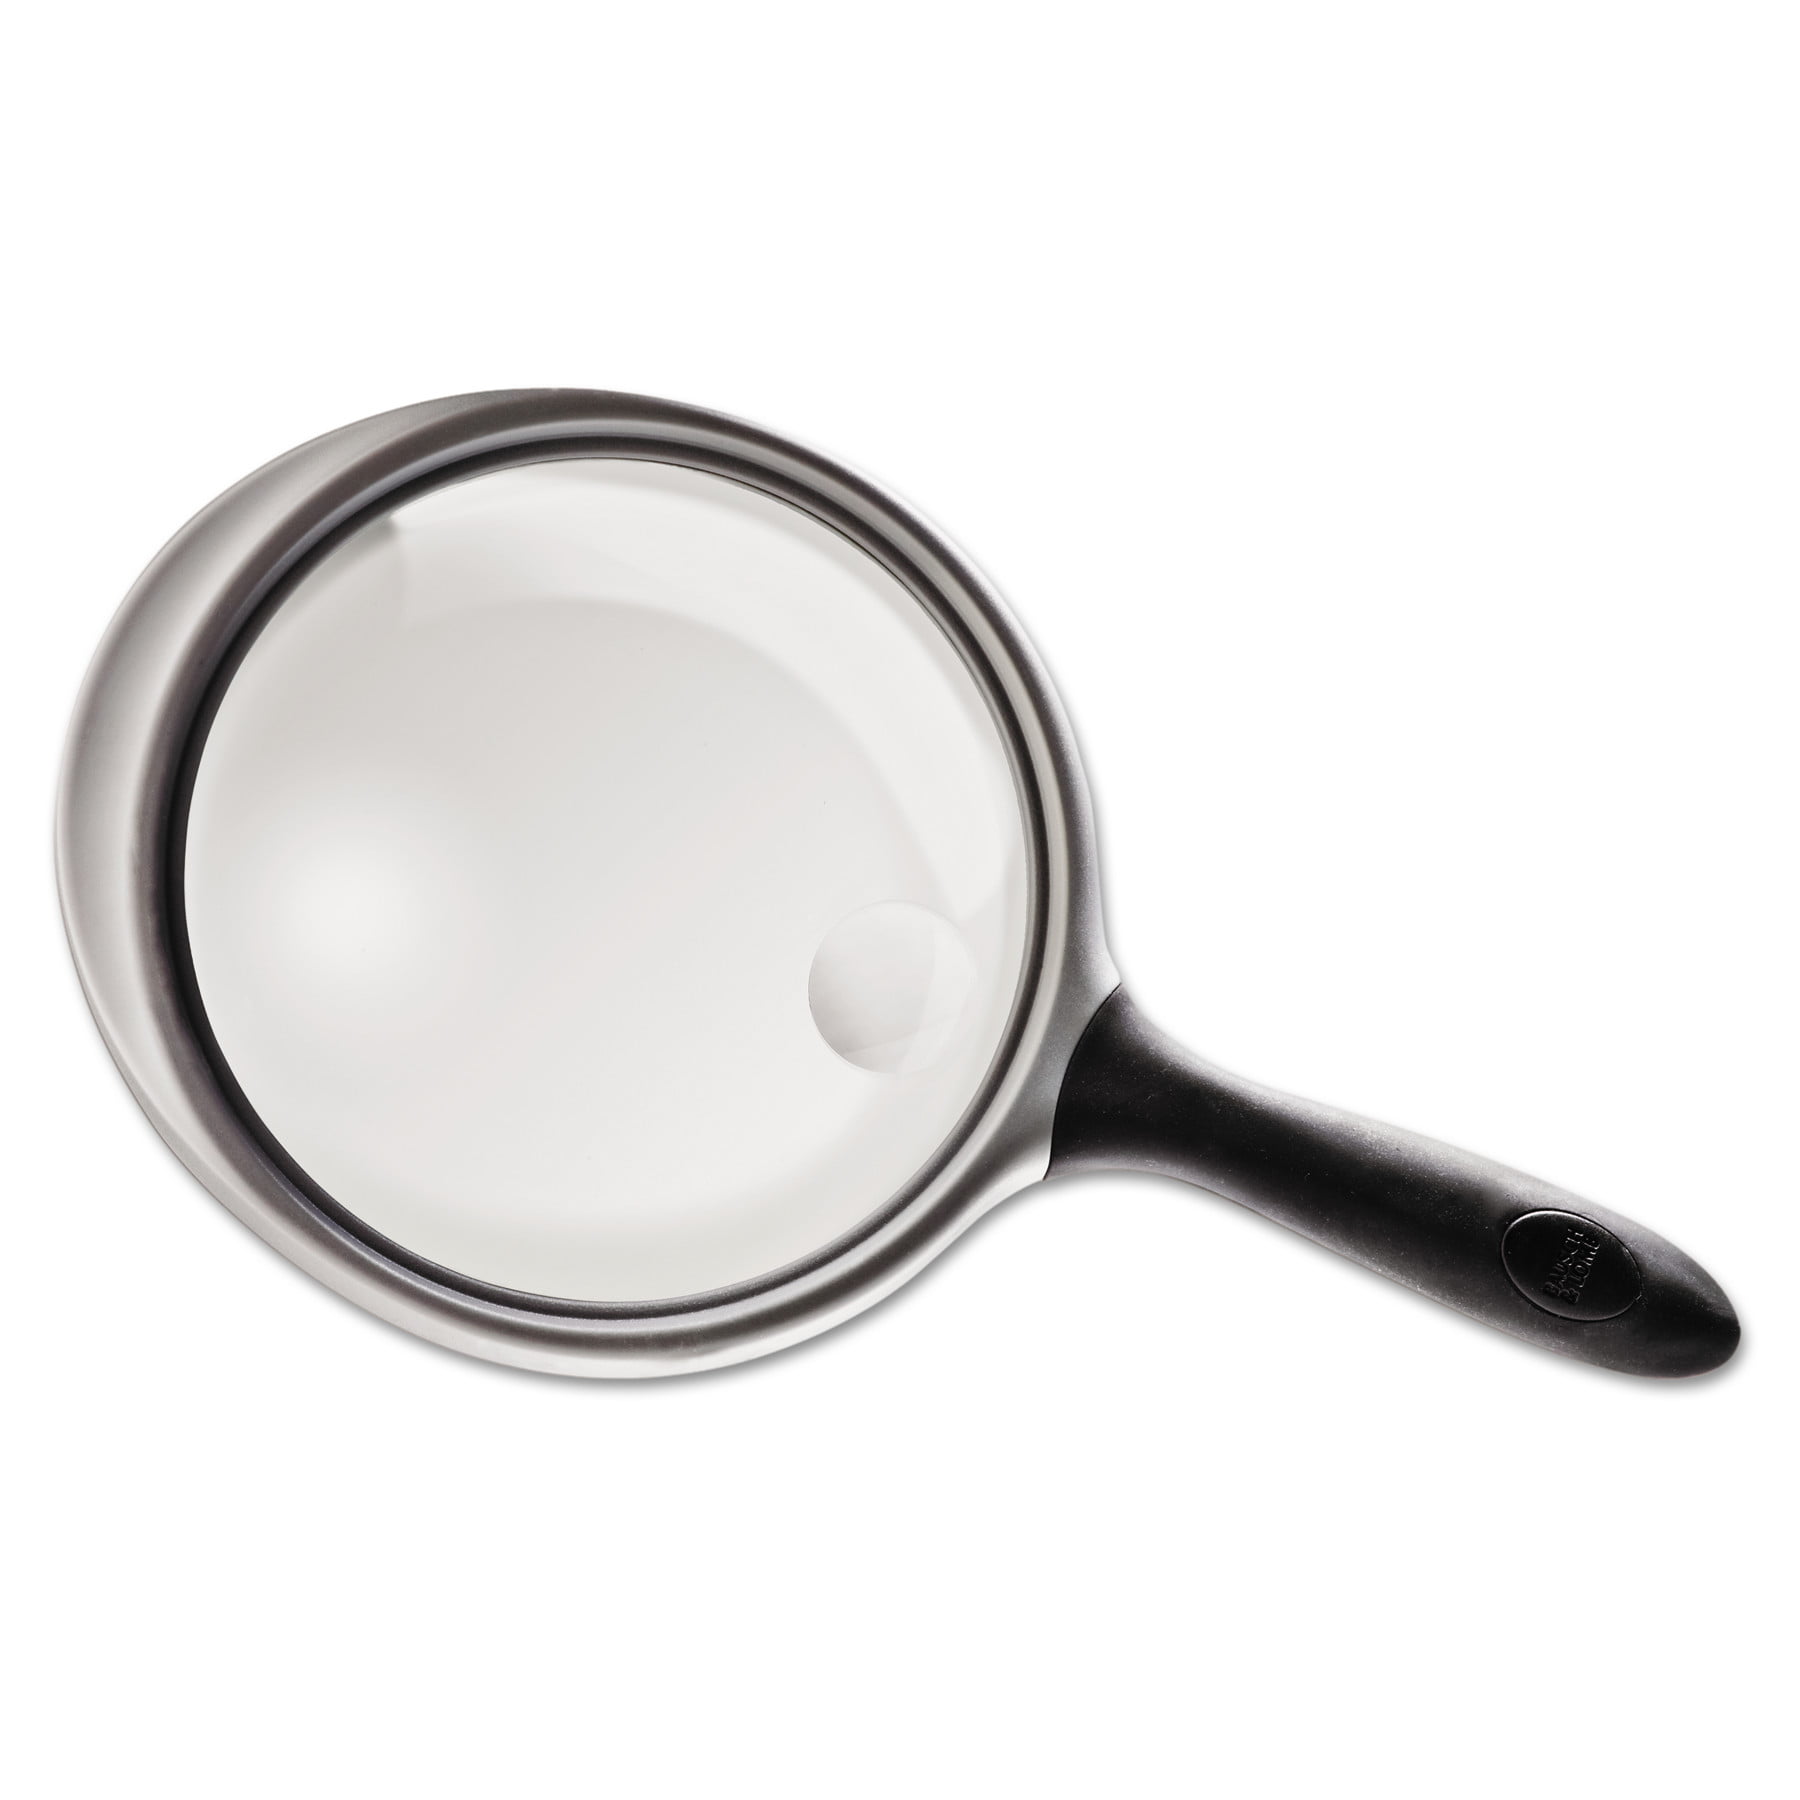 Bausch & Lomb 2X - 4X Round Handheld Magnifier with Acrylic Lens, 5 ...